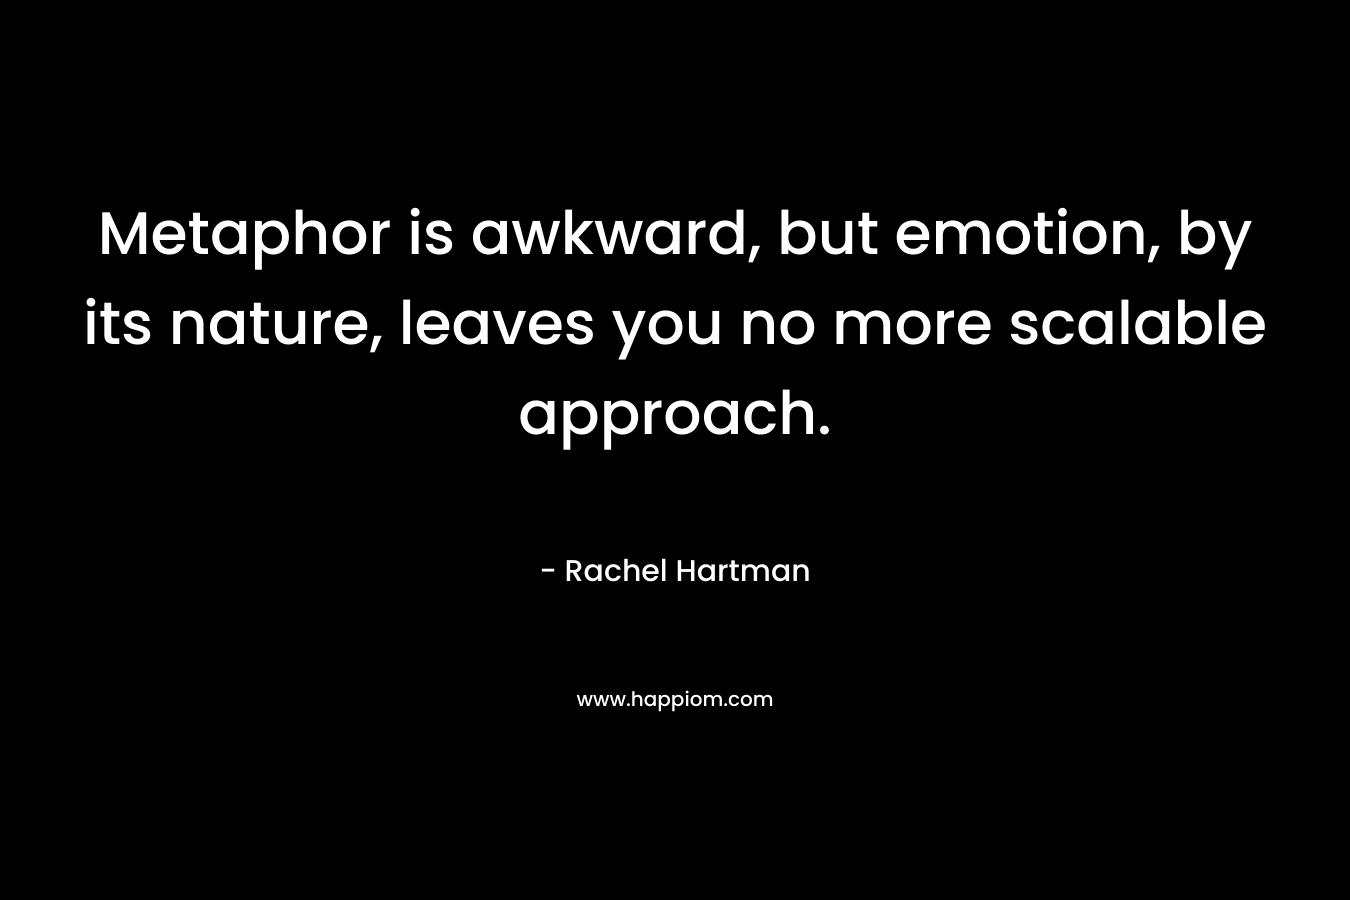 Metaphor is awkward, but emotion, by its nature, leaves you no more scalable approach.